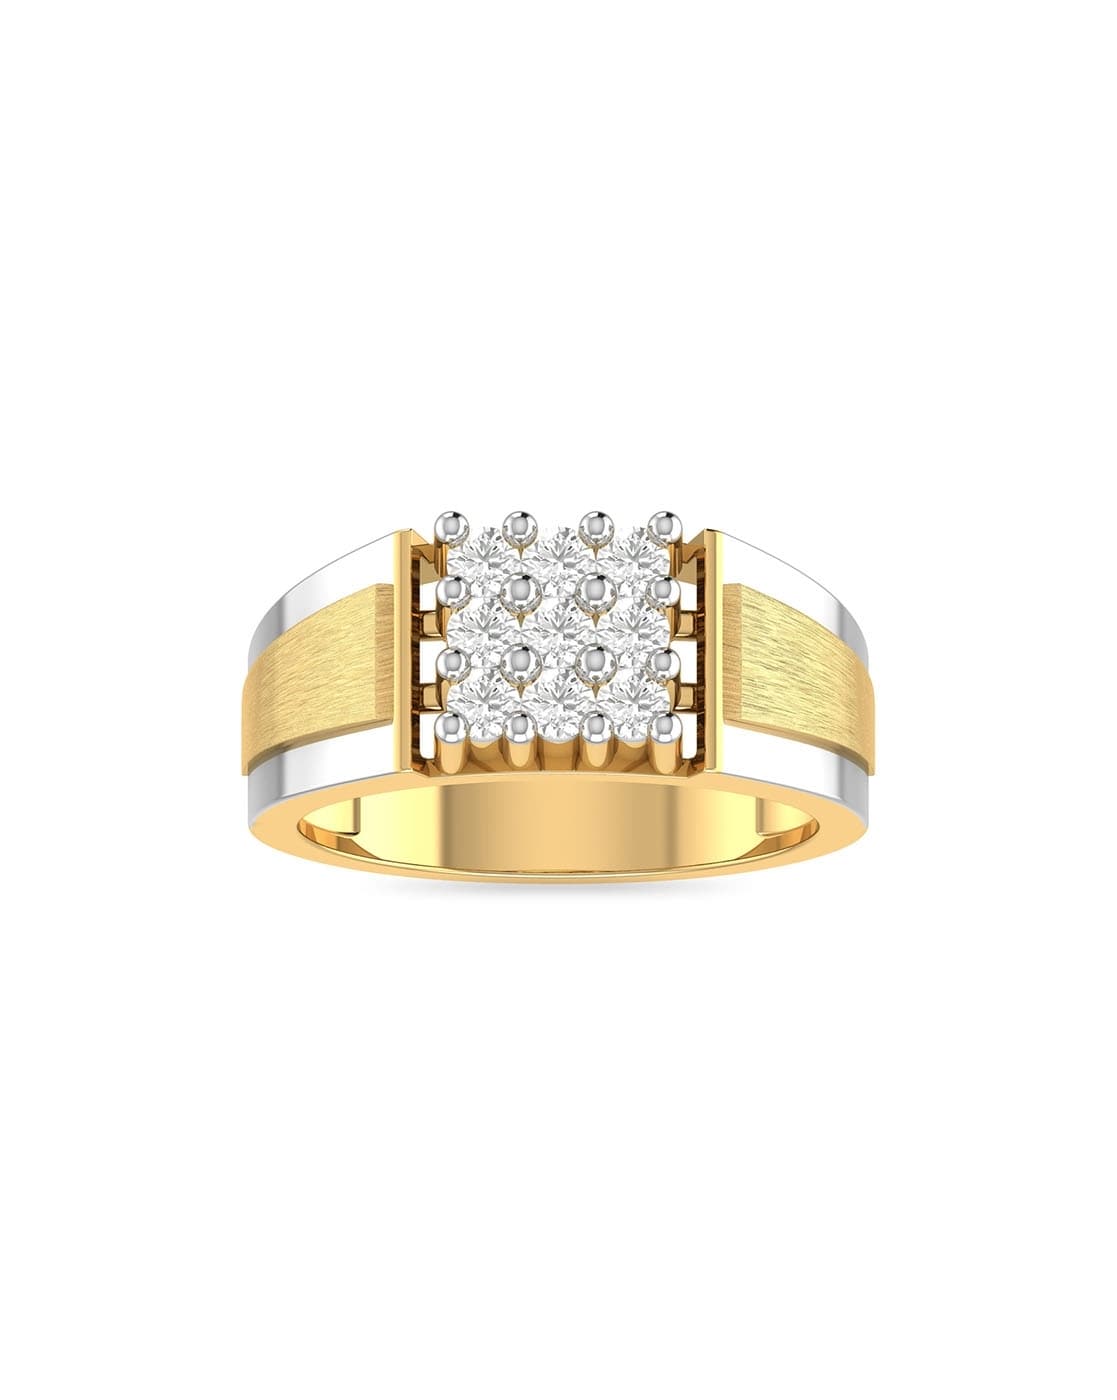 Mid Century Gents Two Tone Diamond Ring | Exquisite Jewelry for Every  Occasion | FWCJ